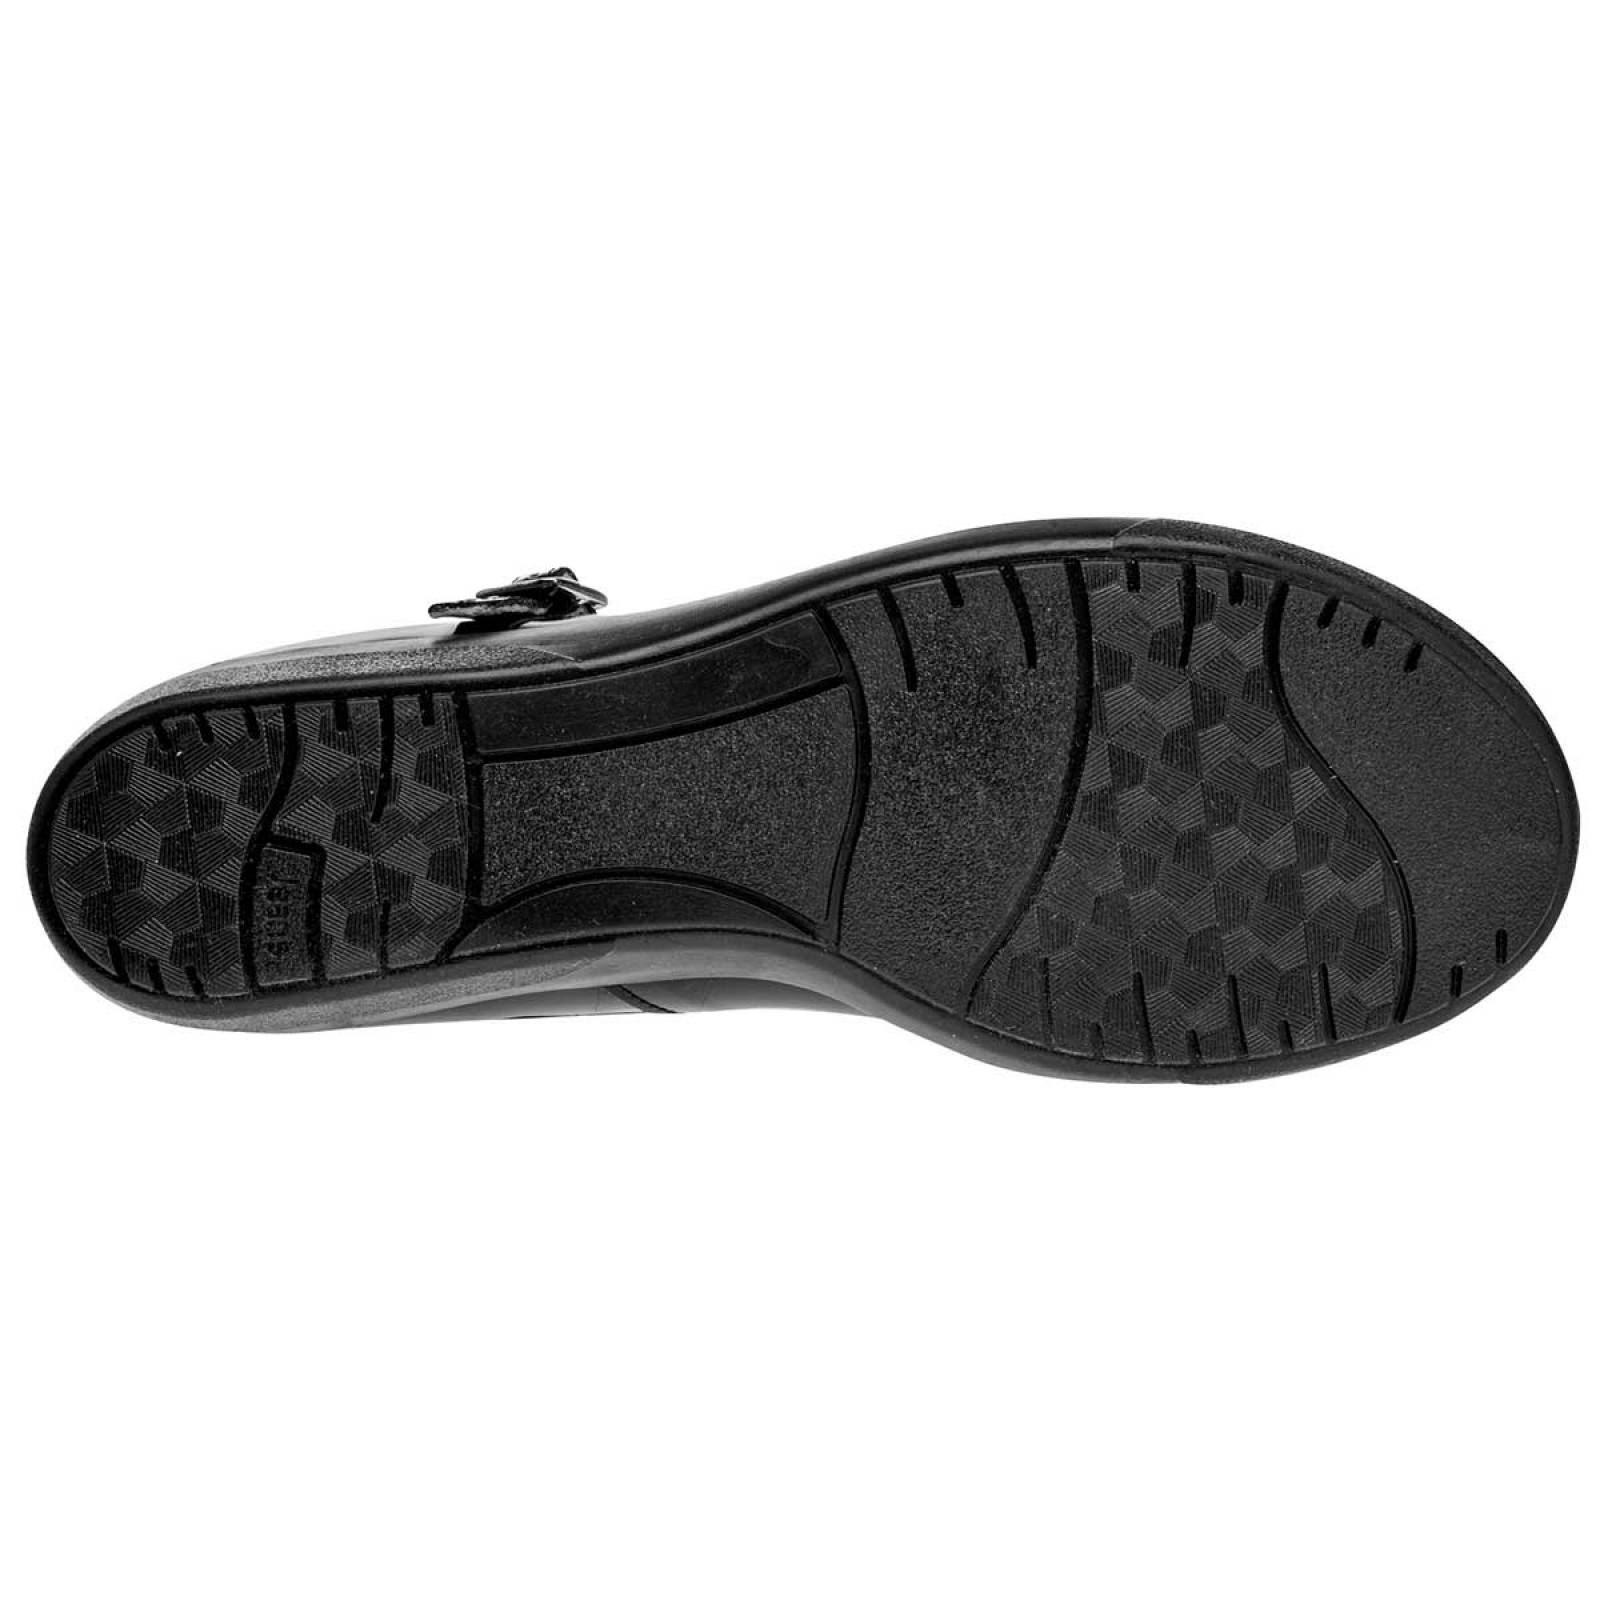 Jeans shoes Zapato Mujer Negro charol